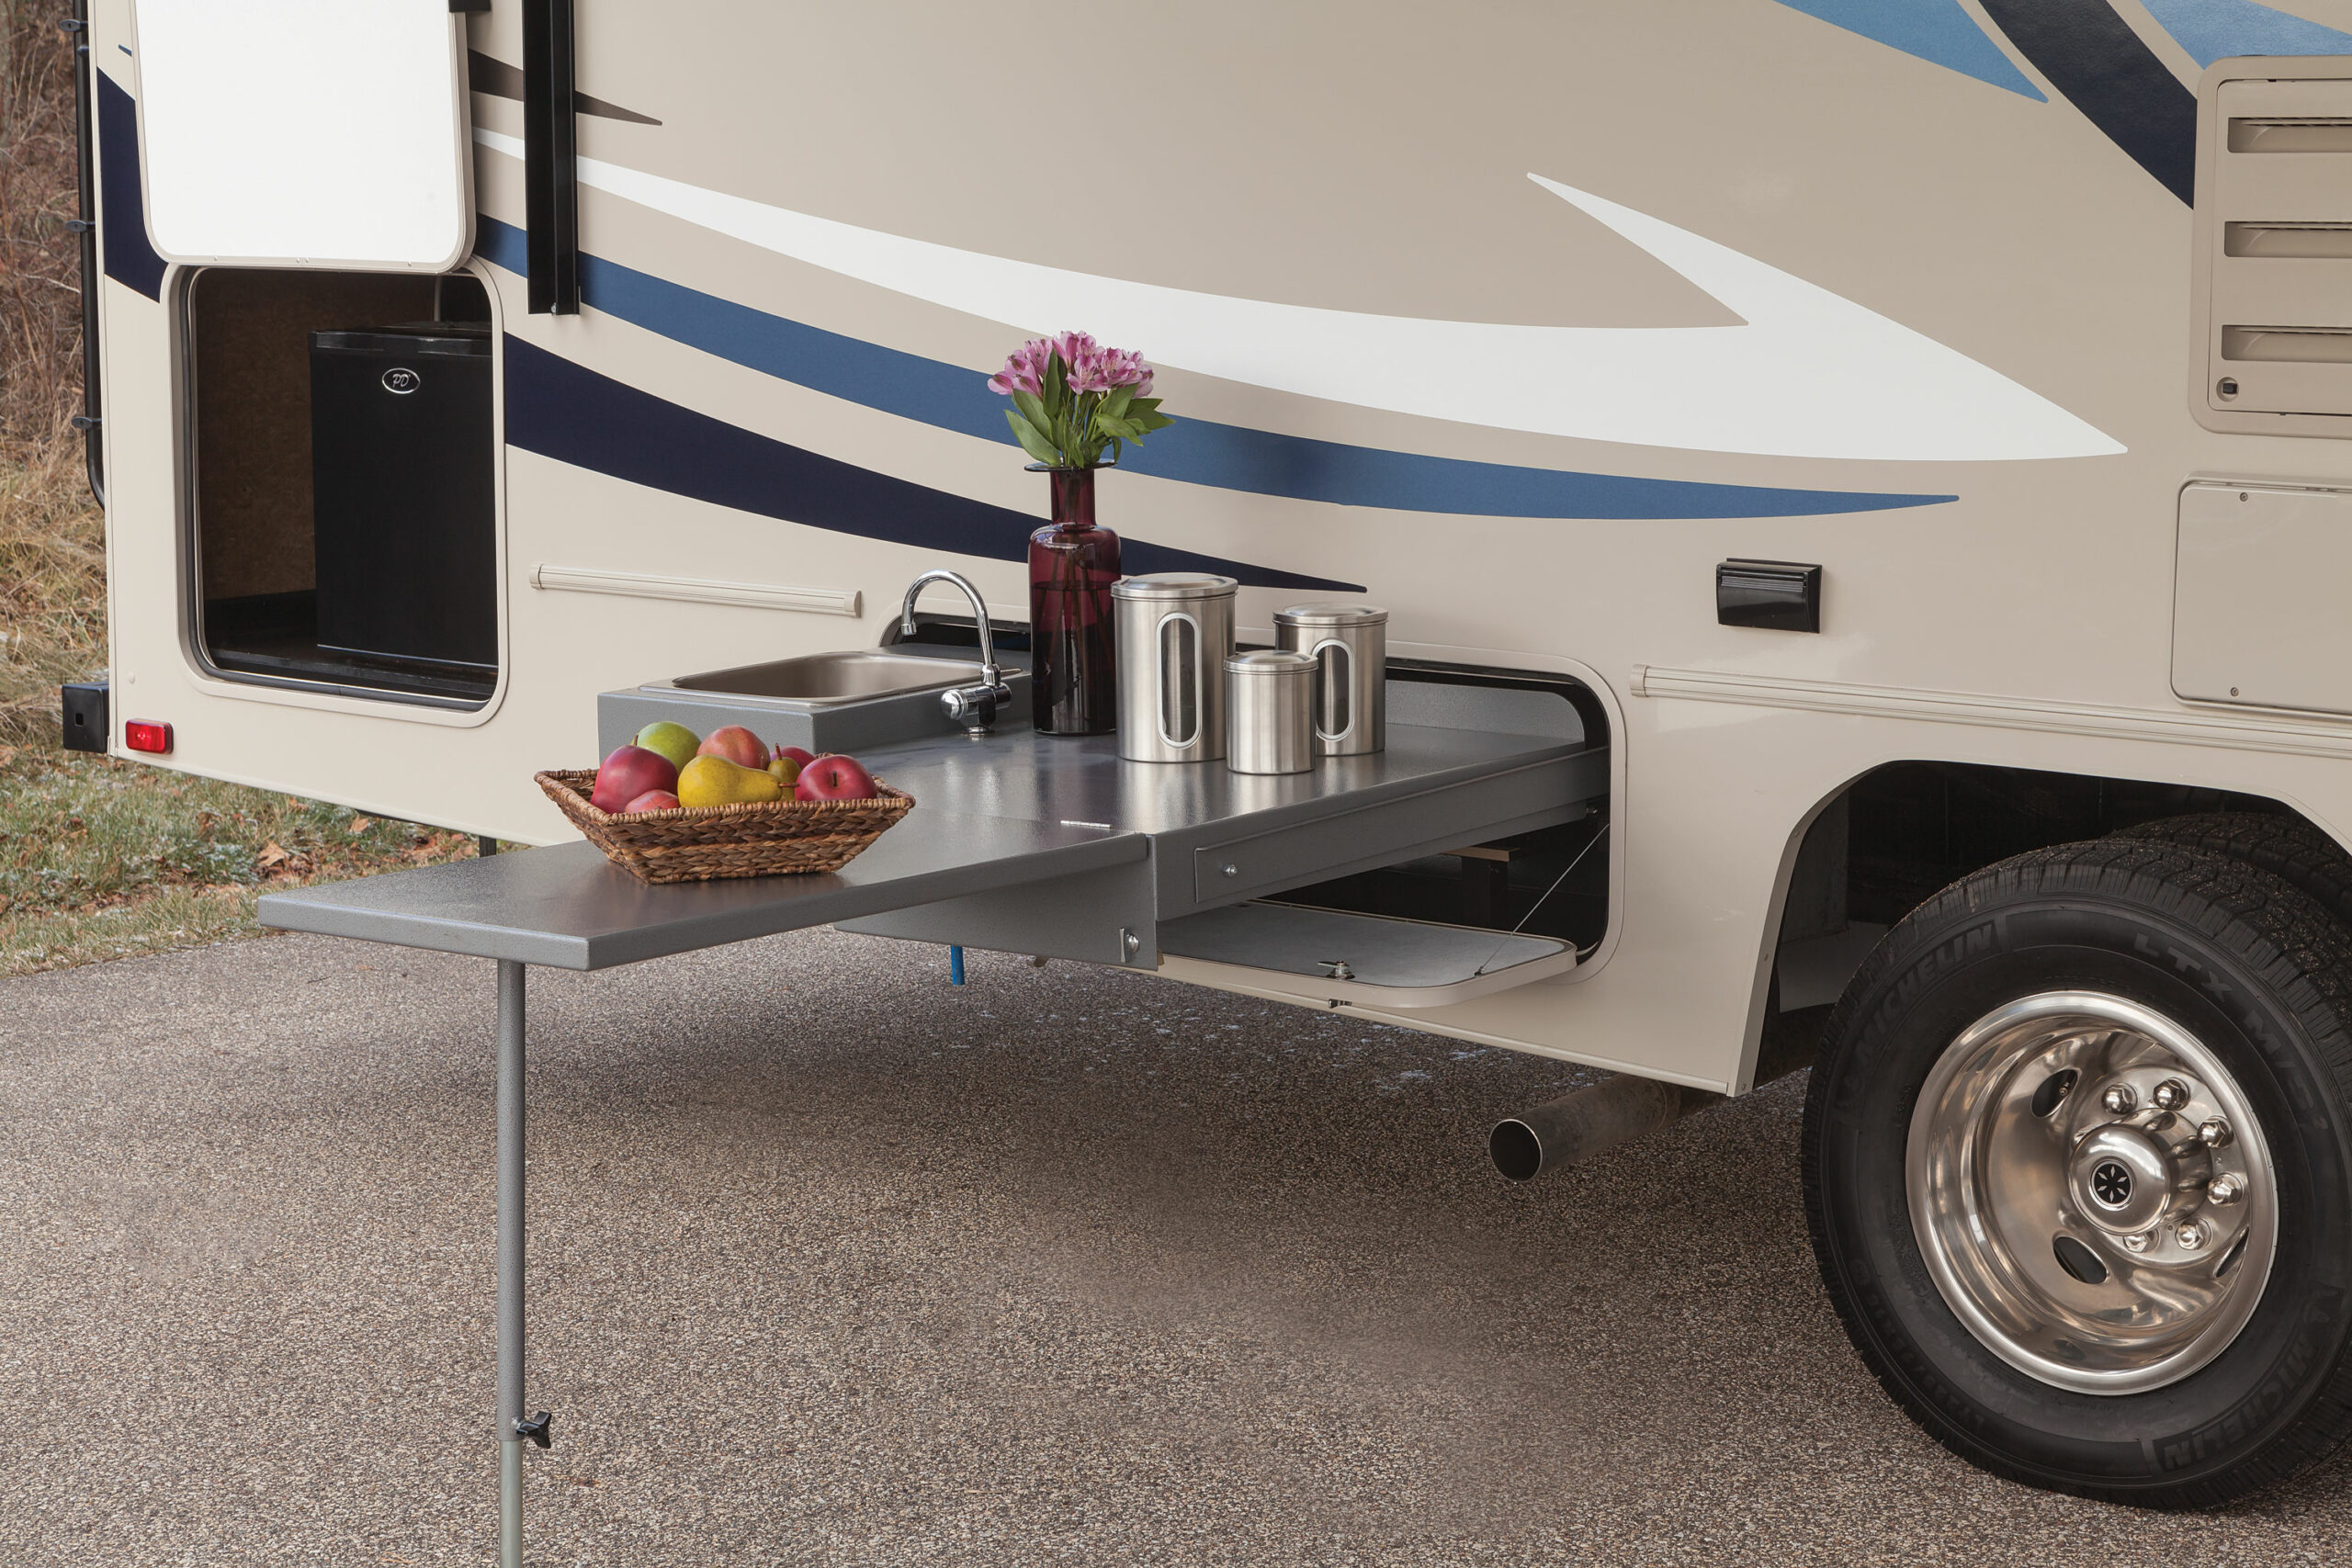 MHC30 motor home travel buitentafel campers canada